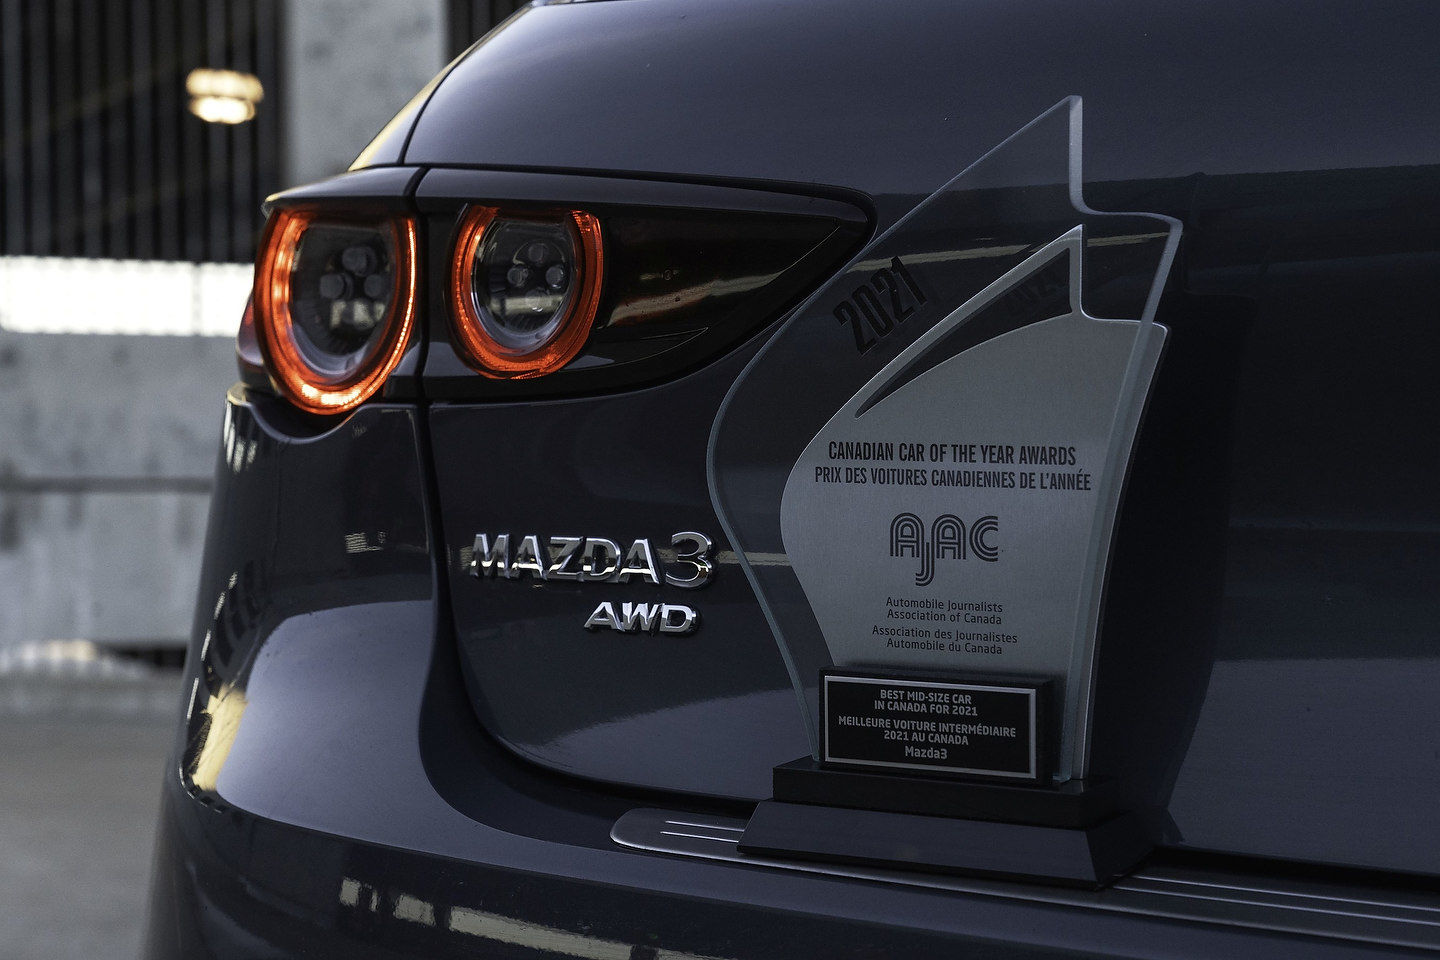 2021 Mazda3 Wins Its Segment In AJAC’s Canadian Car of the Year Awards